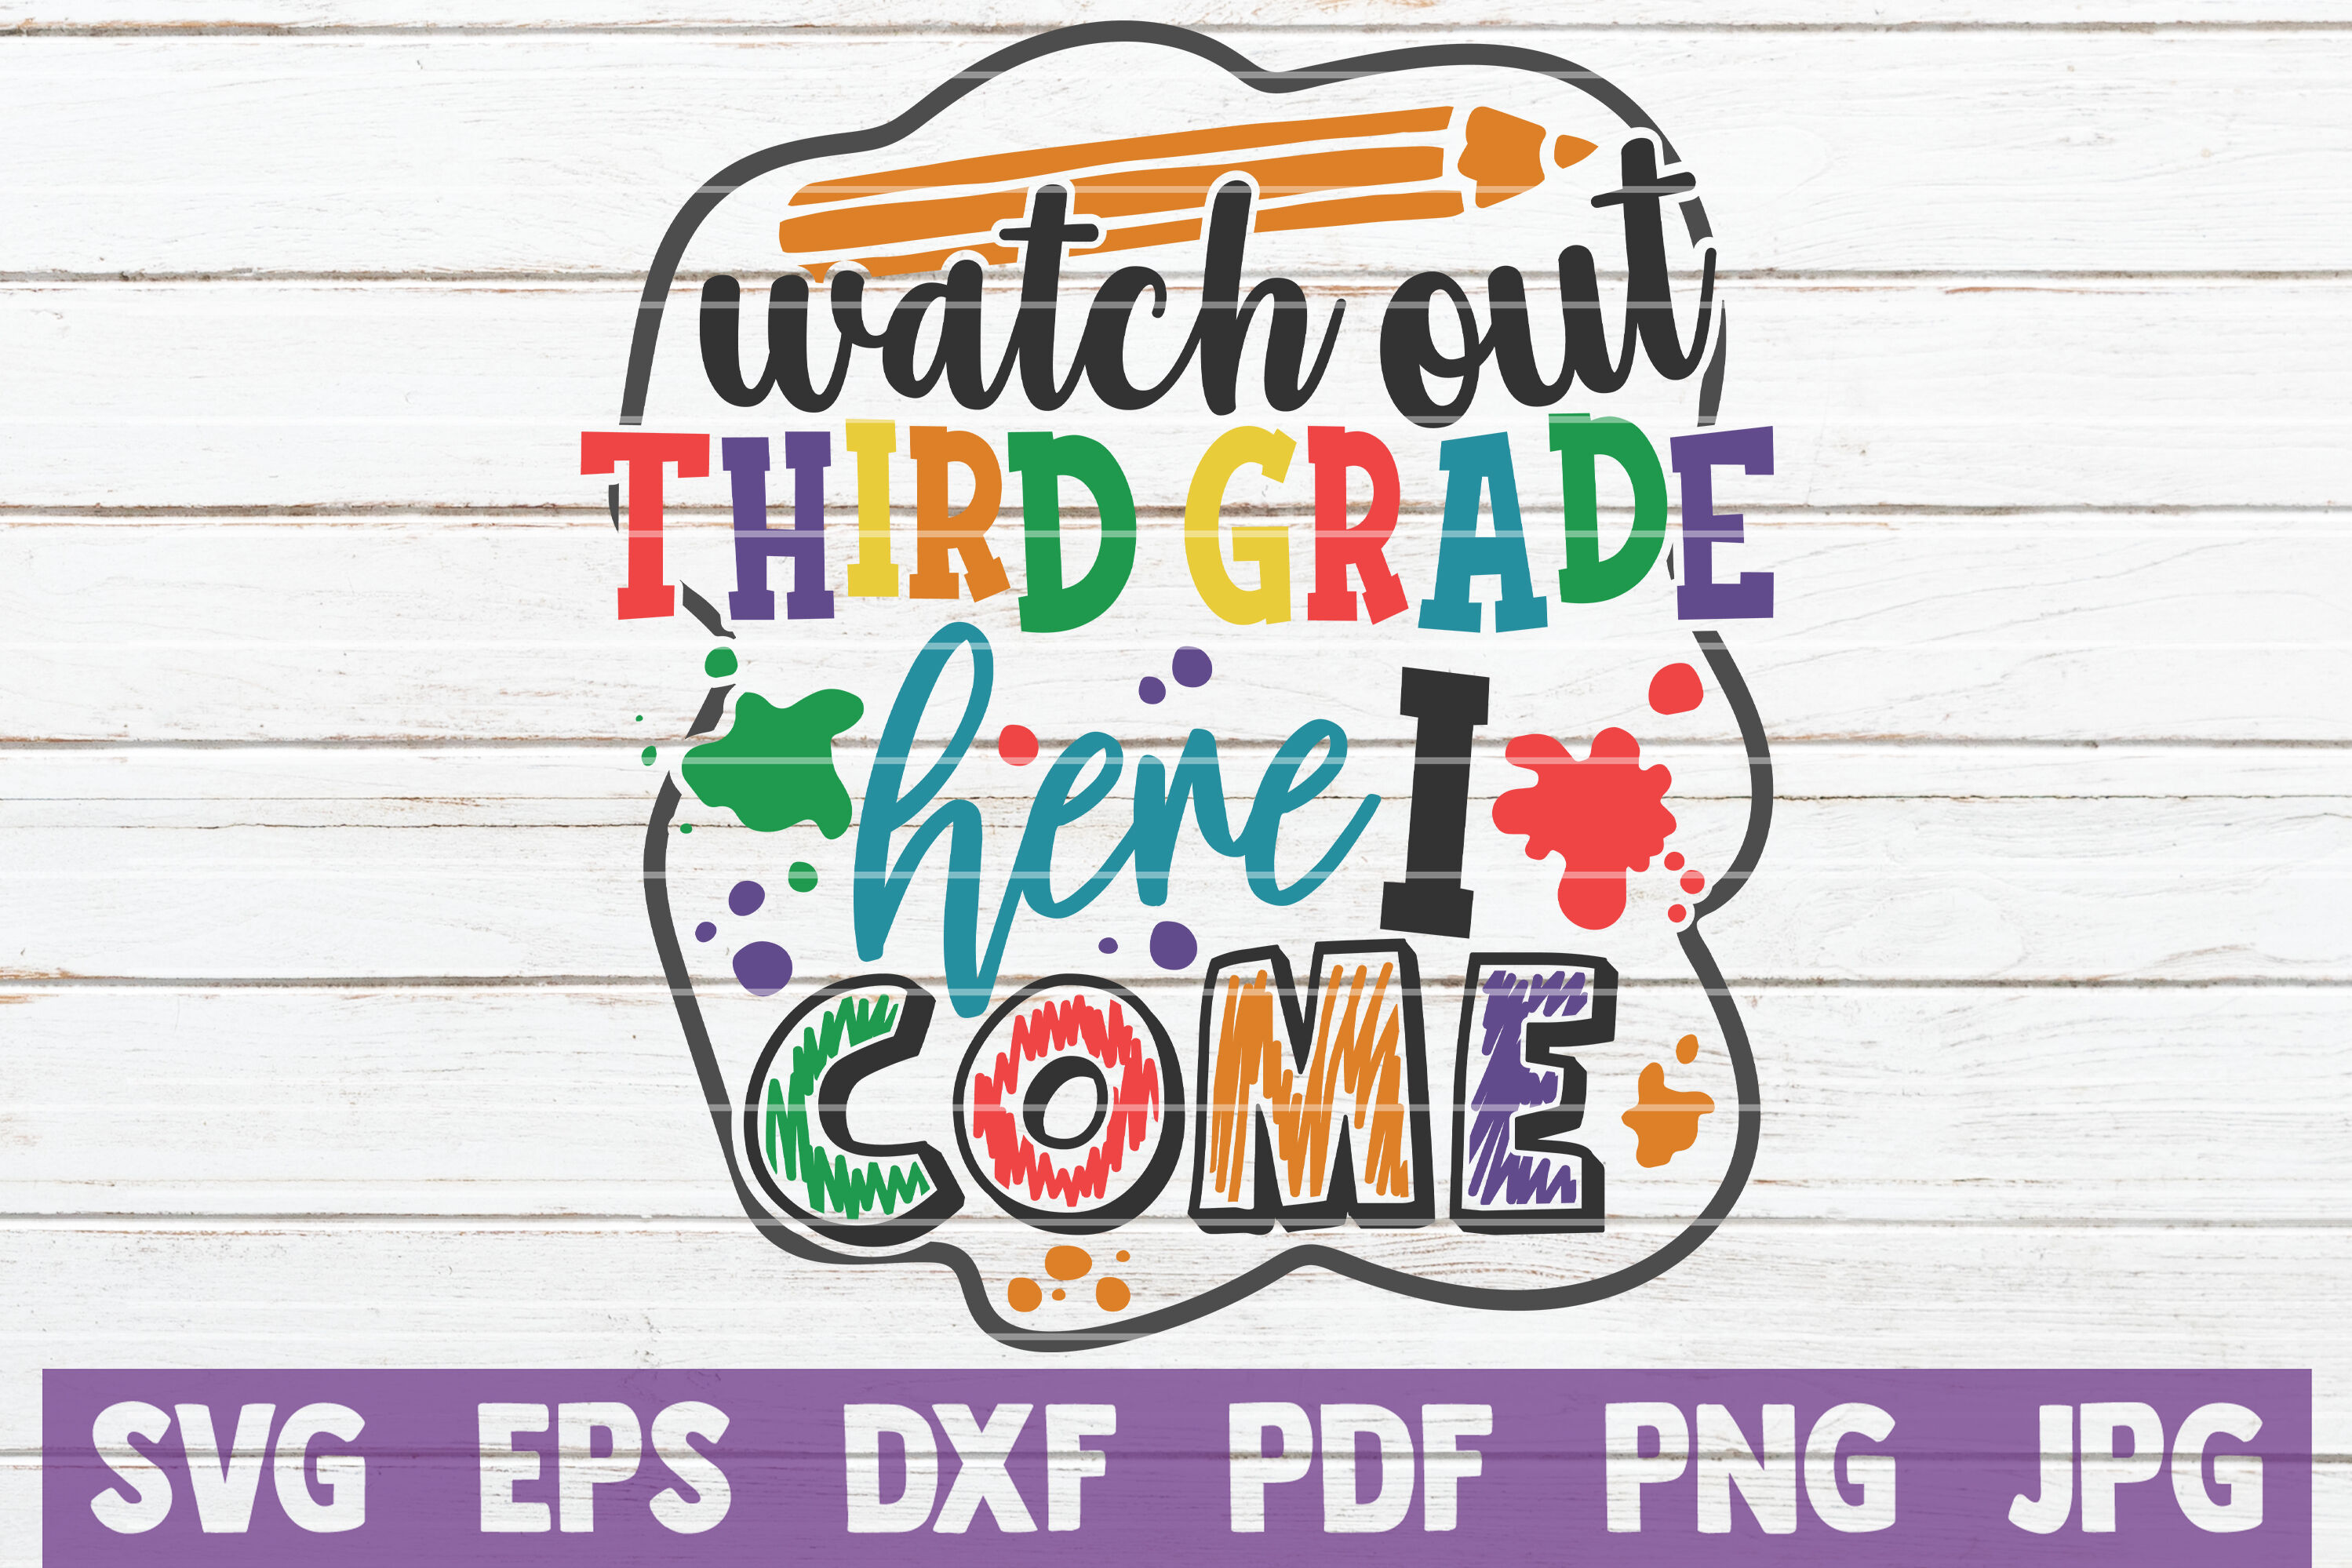 Watch Out Third Grade Here I Come Svg Cut File By Mintymarshmallows Thehungryjpeg Com